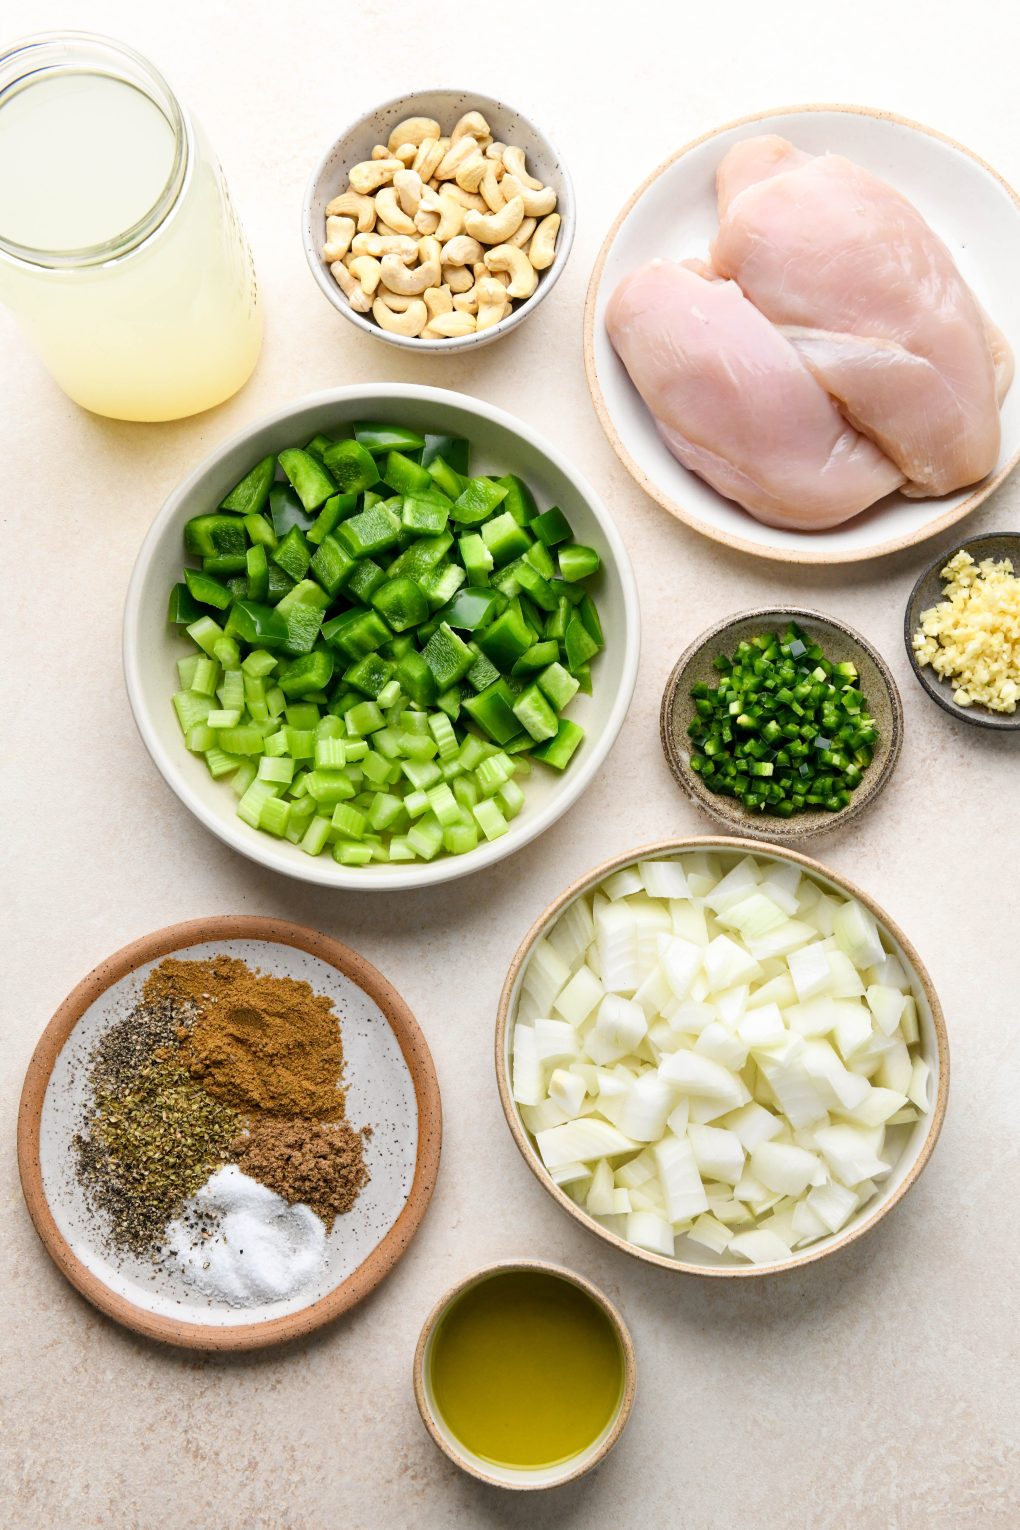 Ingredients for whole30 white chicken chili in various ceramic plates and bowls on a light cream colored background.